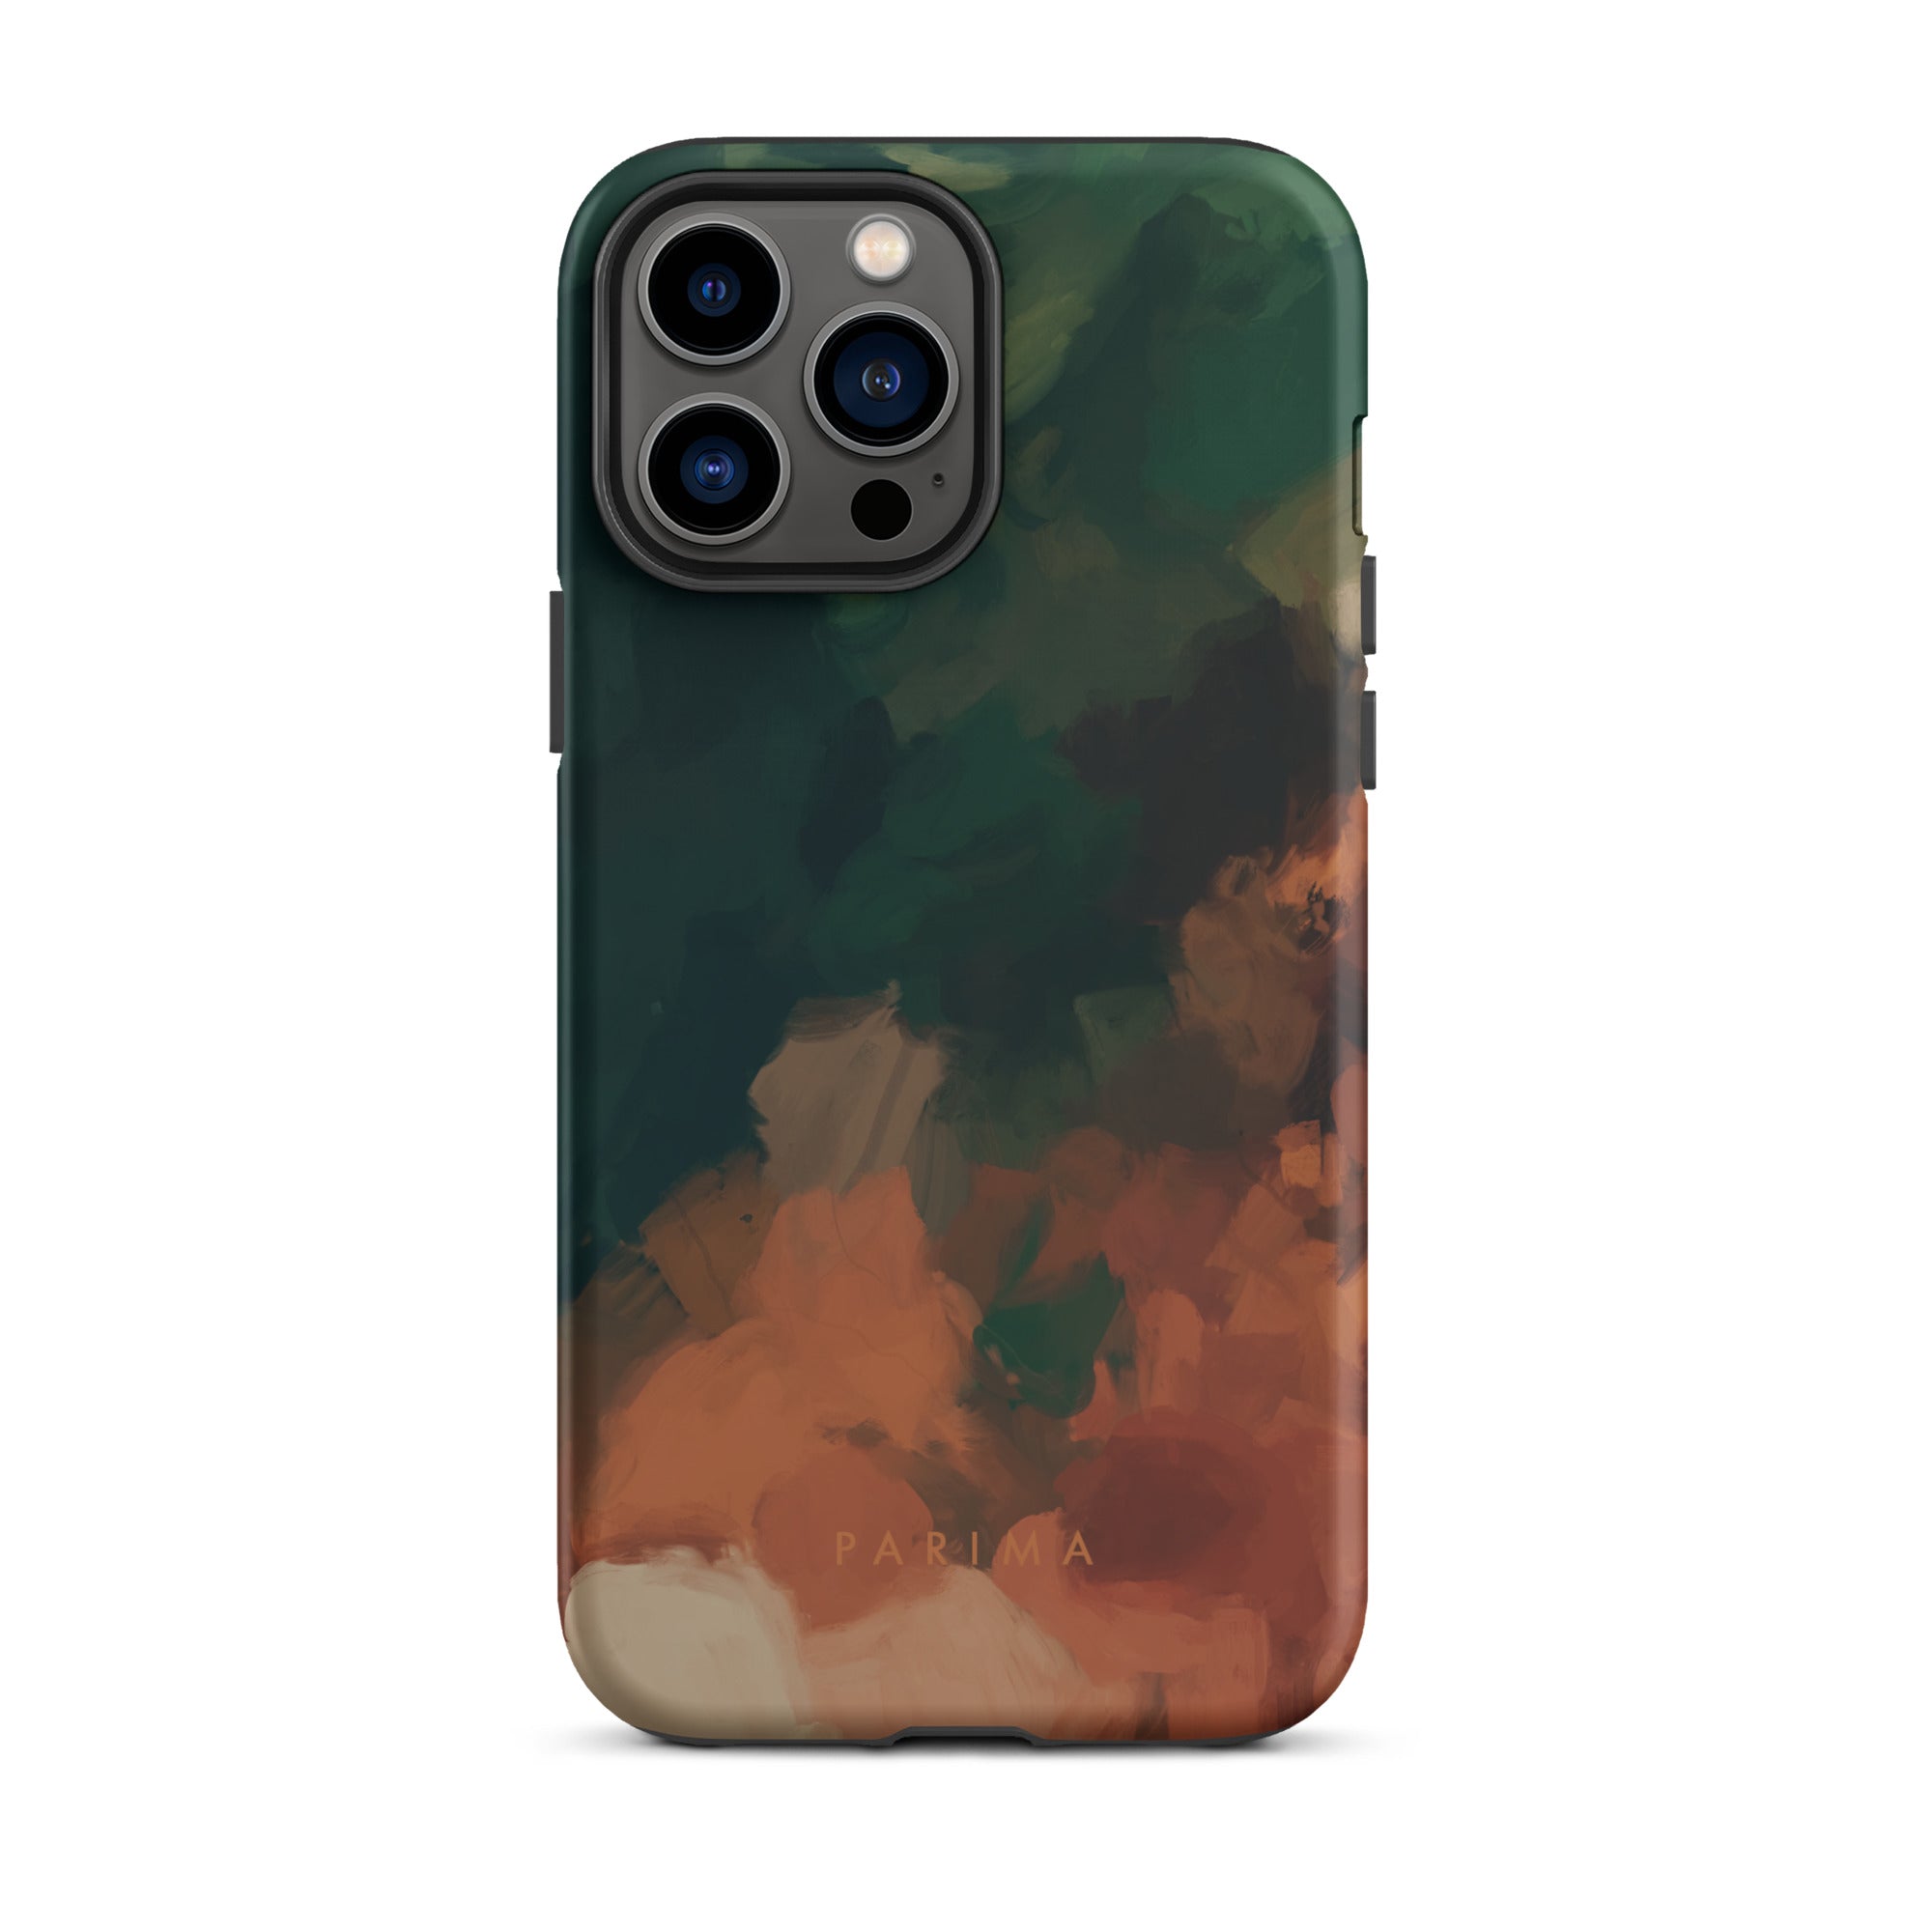 Cedar, green and brown abstract art - iPhone 13 Pro Max tough case by Parima Studio